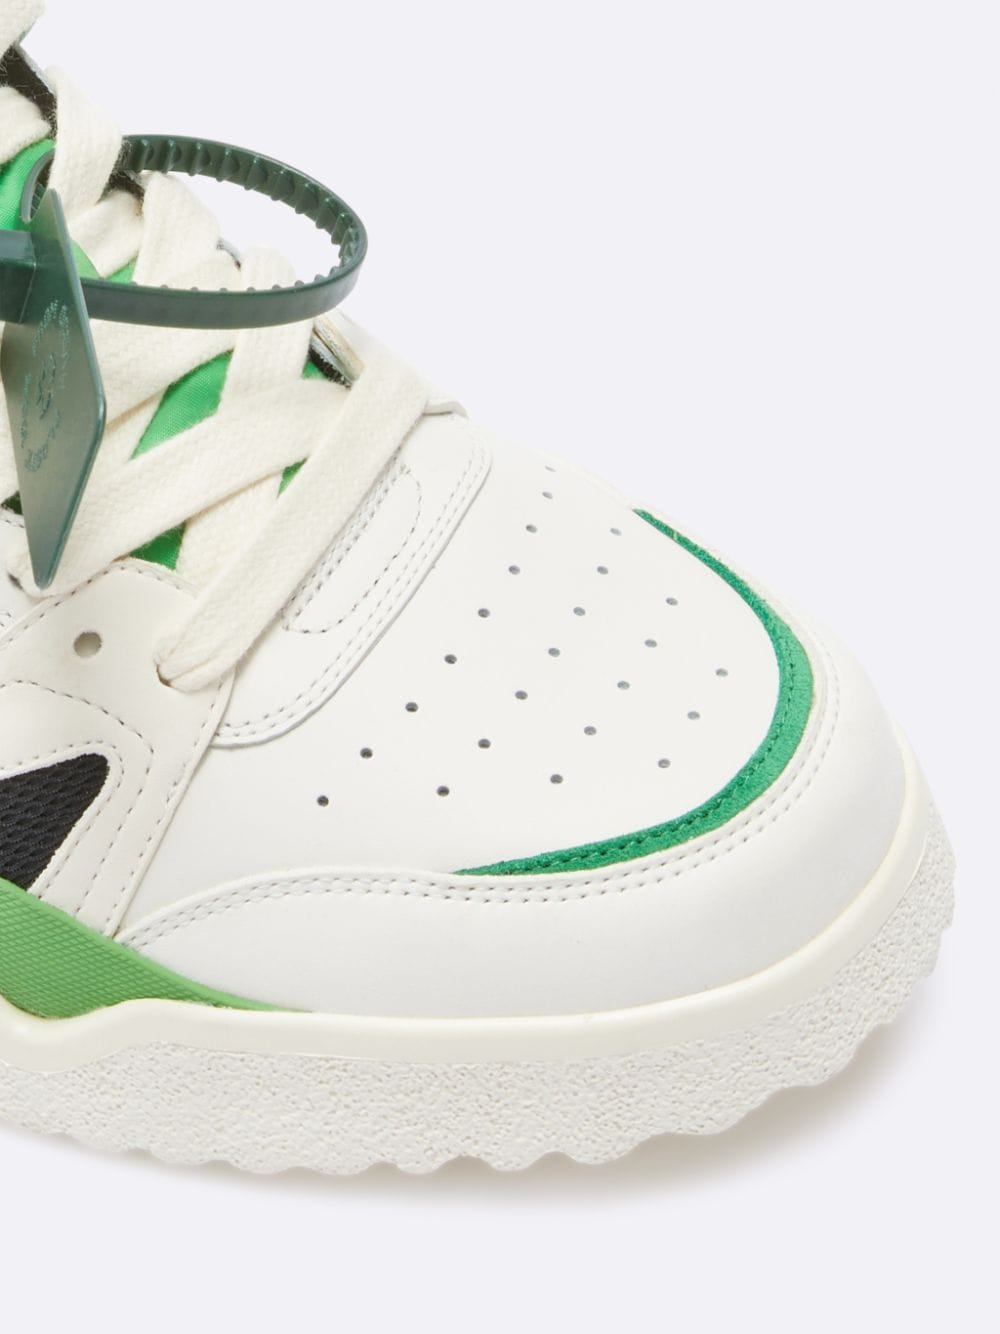 Off-White New Mid Top Sponge Green / Black Mid Top Sneakers